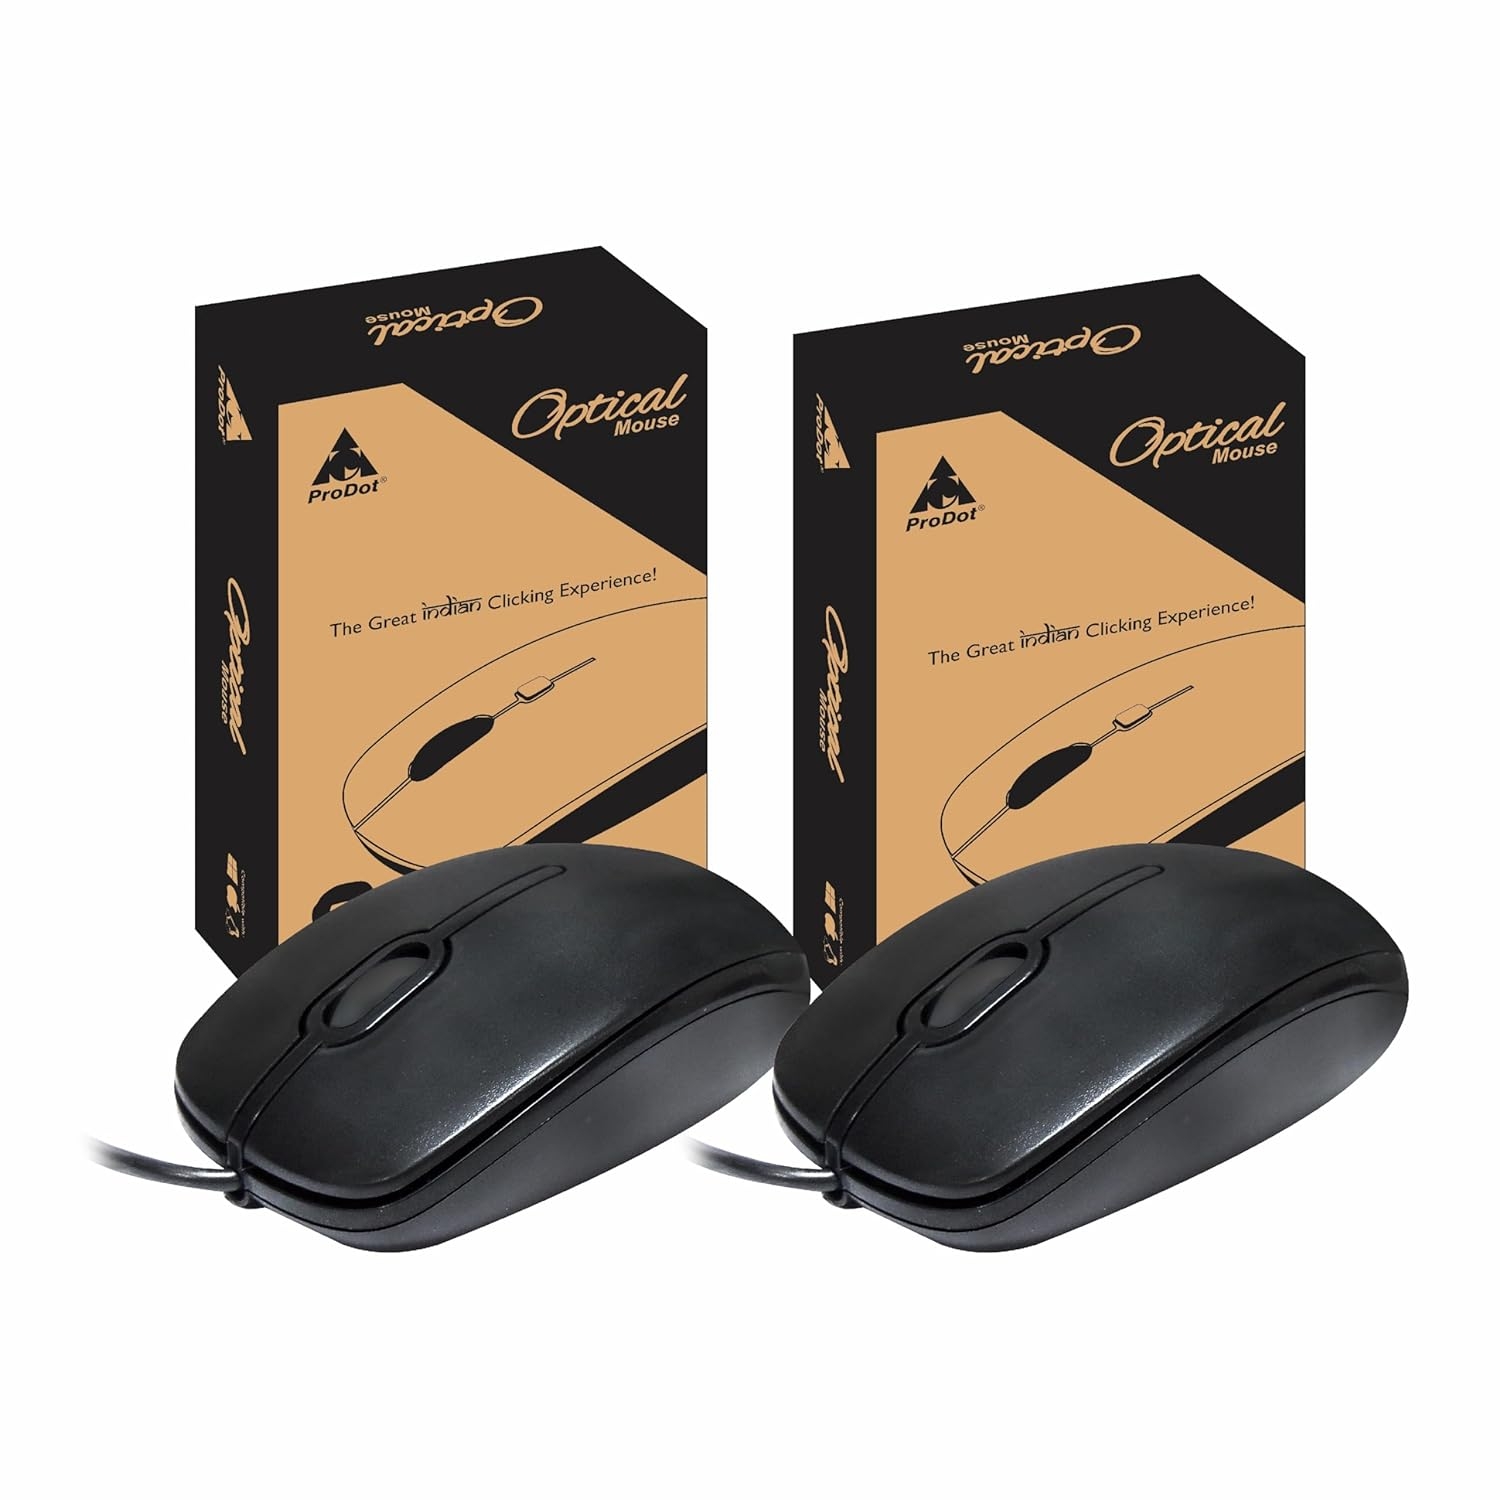 ProDot High-Performance Mouse - Ergonomic Design, Precise Tracking, Universal Compatibility - Ideal for PC, Mac, Gaming, and Office Use (185 (Pack of 2), Wired)